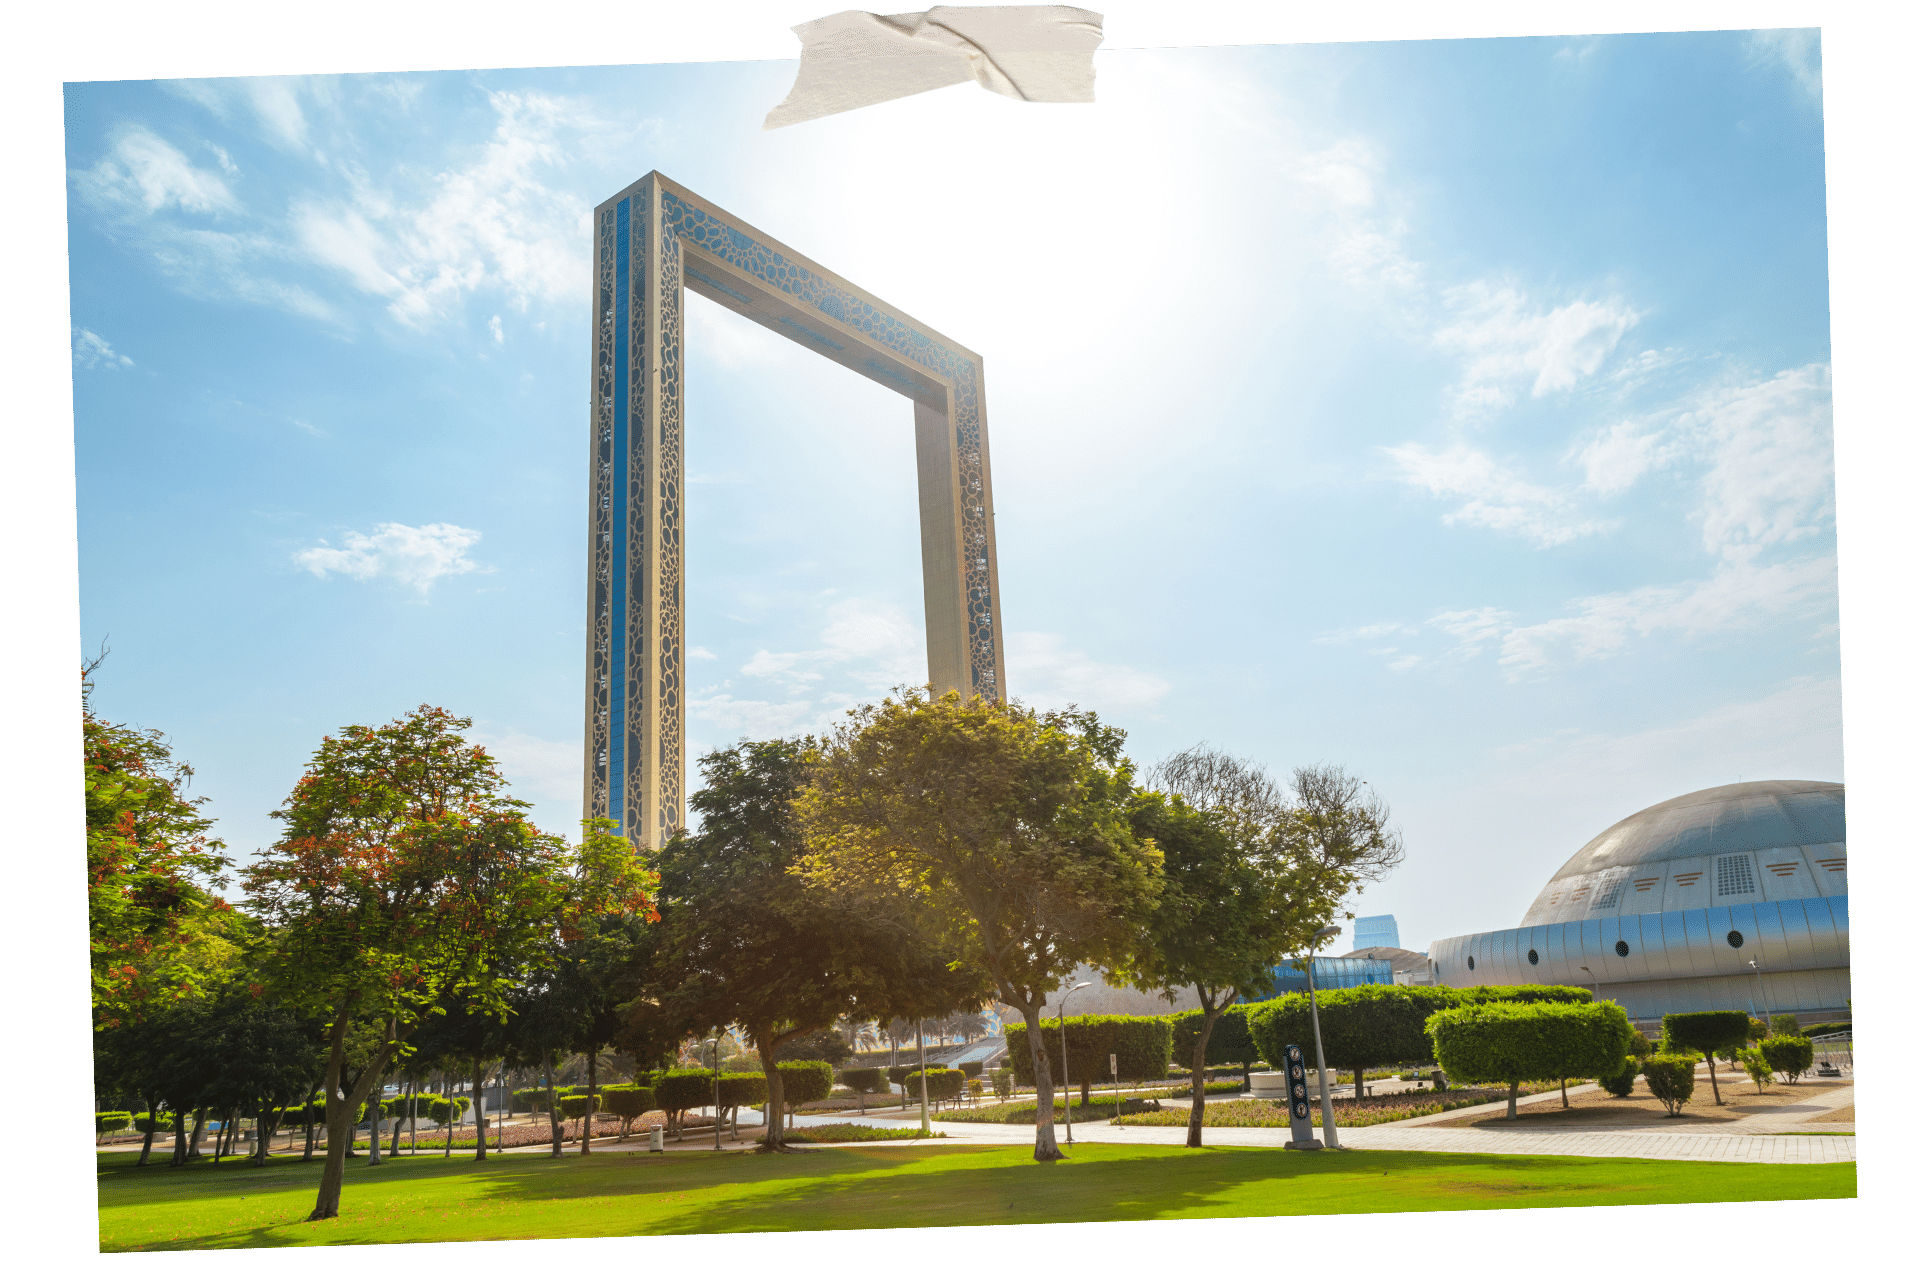 The Dubai Frame is one of Dubai's hidden gems. An image, scrapbook style, shows a large metal frame rising into the sky, with a lawn and trees surrounding its base.